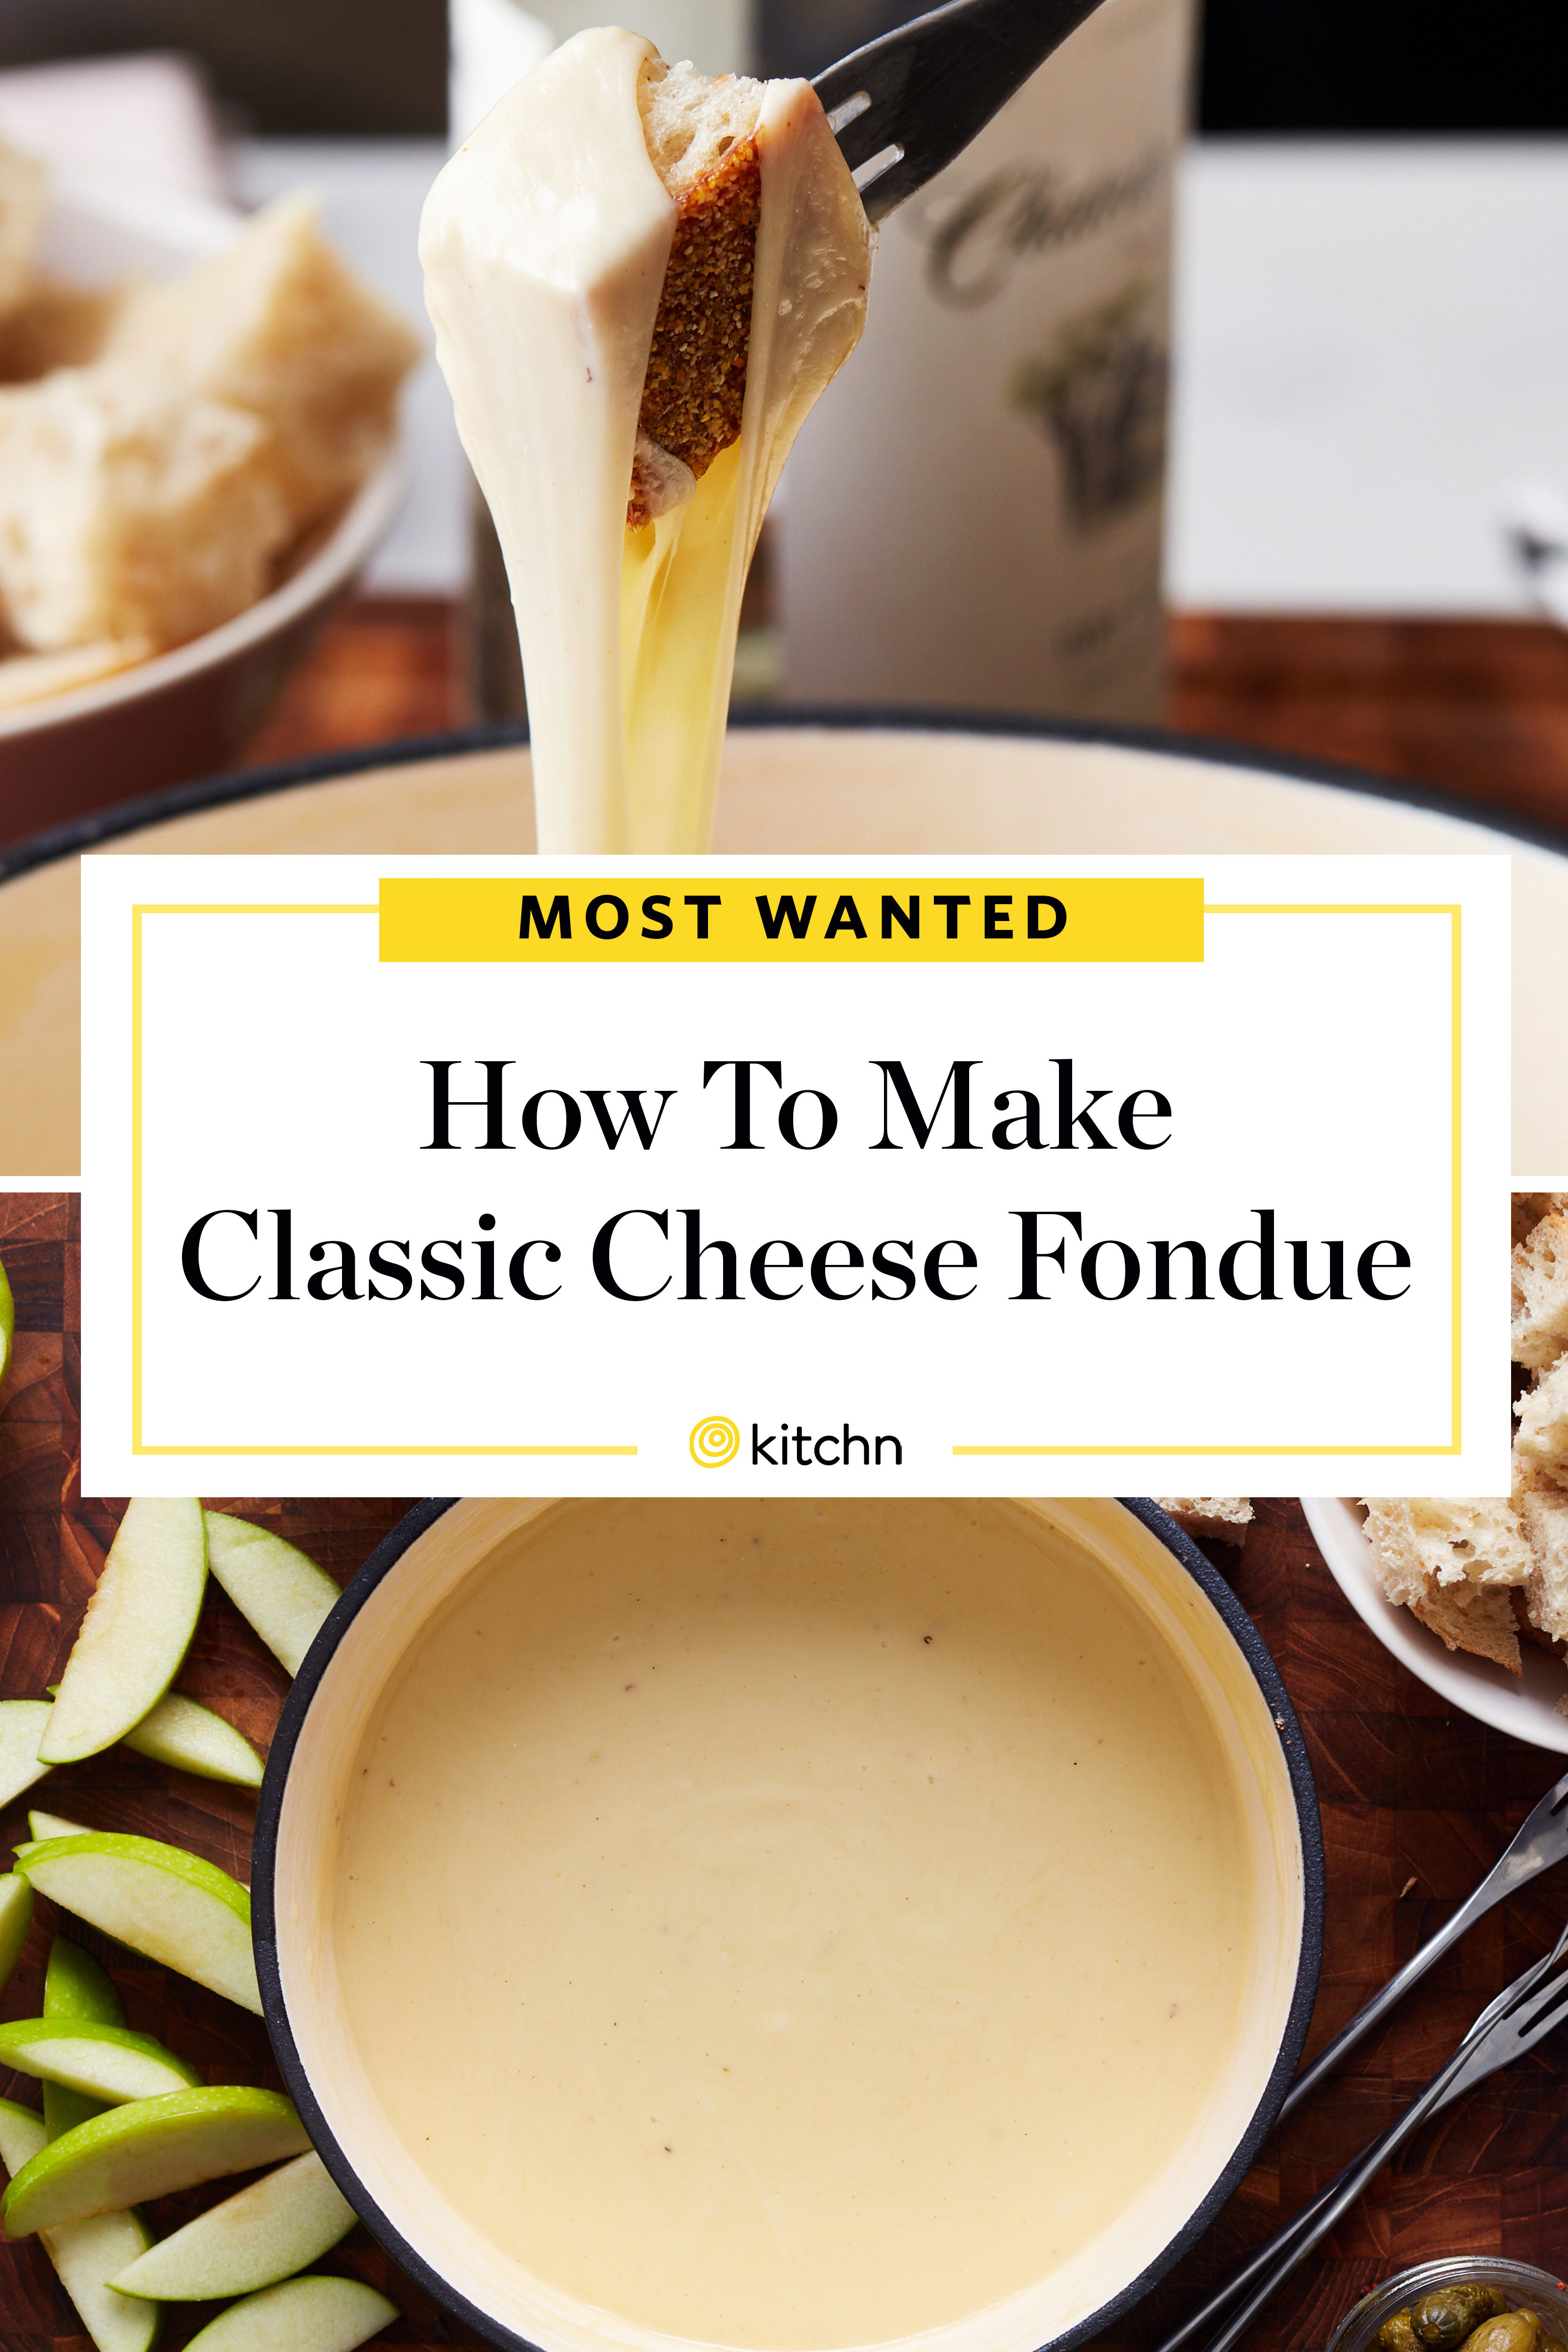 How to Make Classic Cheese Fondue at Home